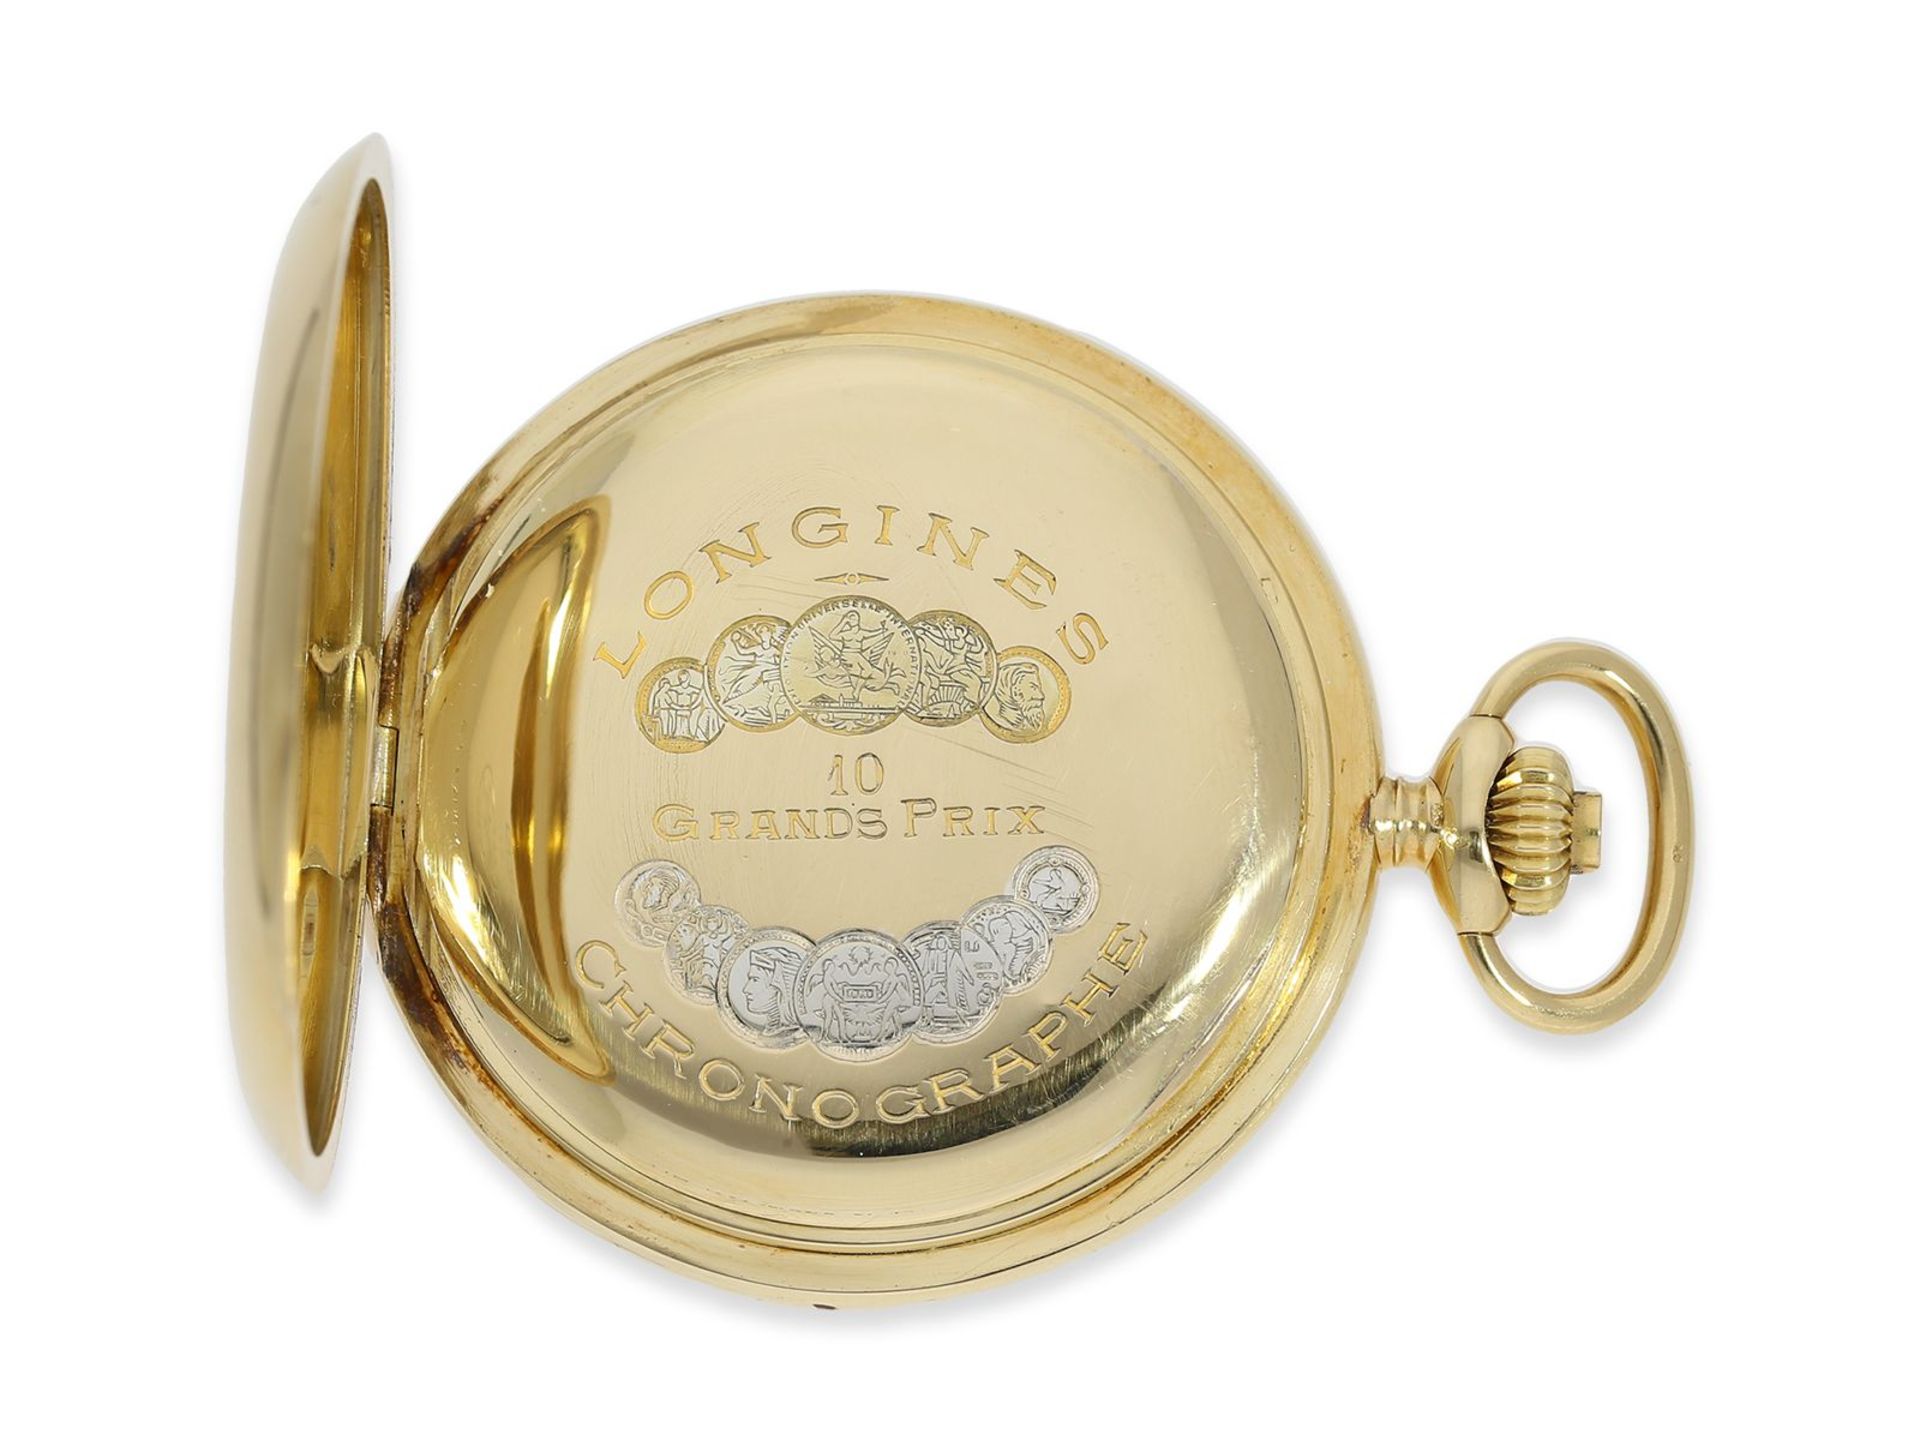 Pocket watch: fine 18K gold doctor's chronograph, Longines, ca. 1915, Ankerchronometer quality - Image 3 of 6